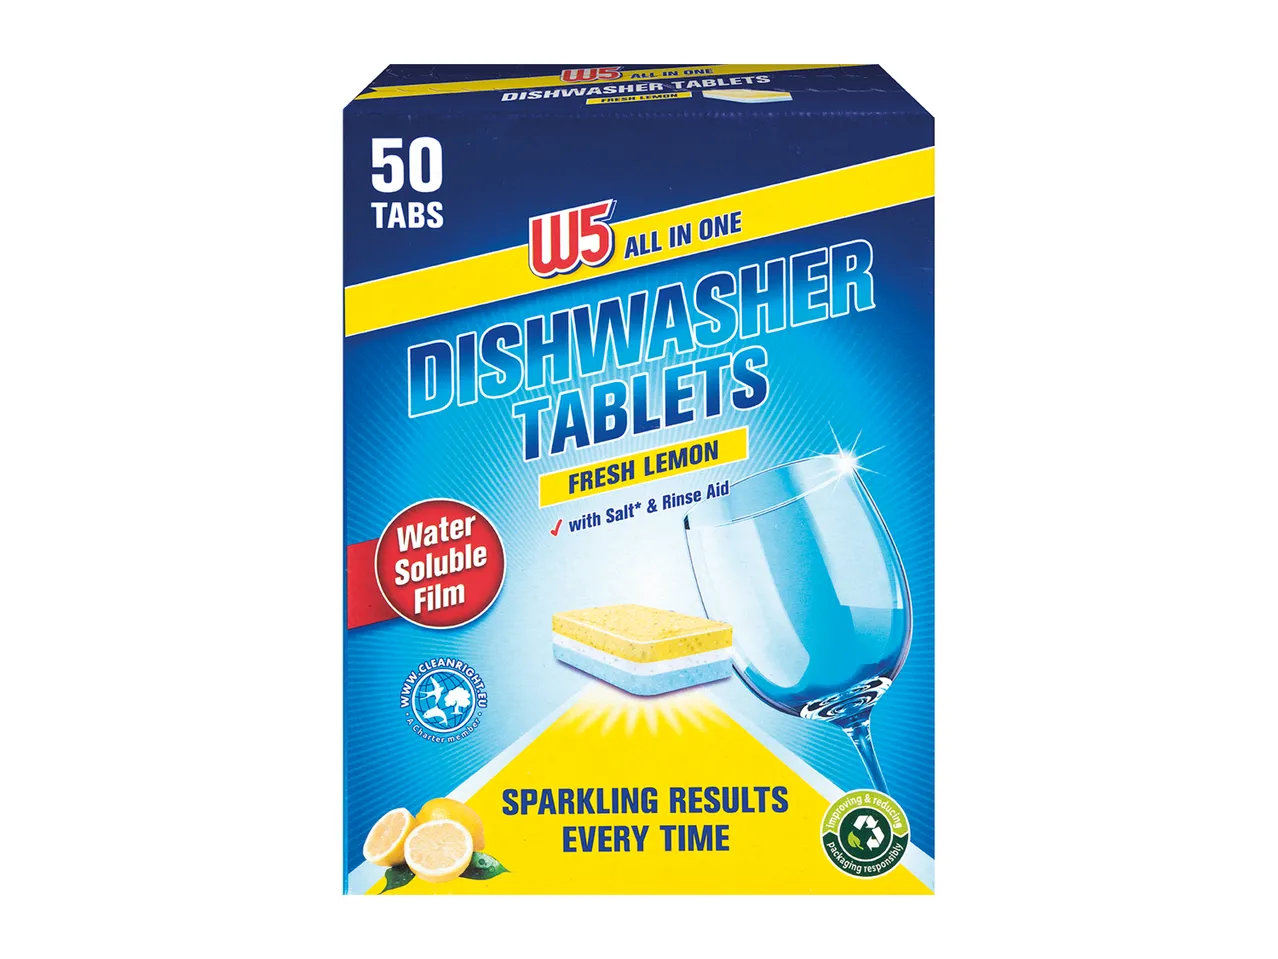 Go to full screen view: W5 Dishwasher Tablets Lemon - Image 1